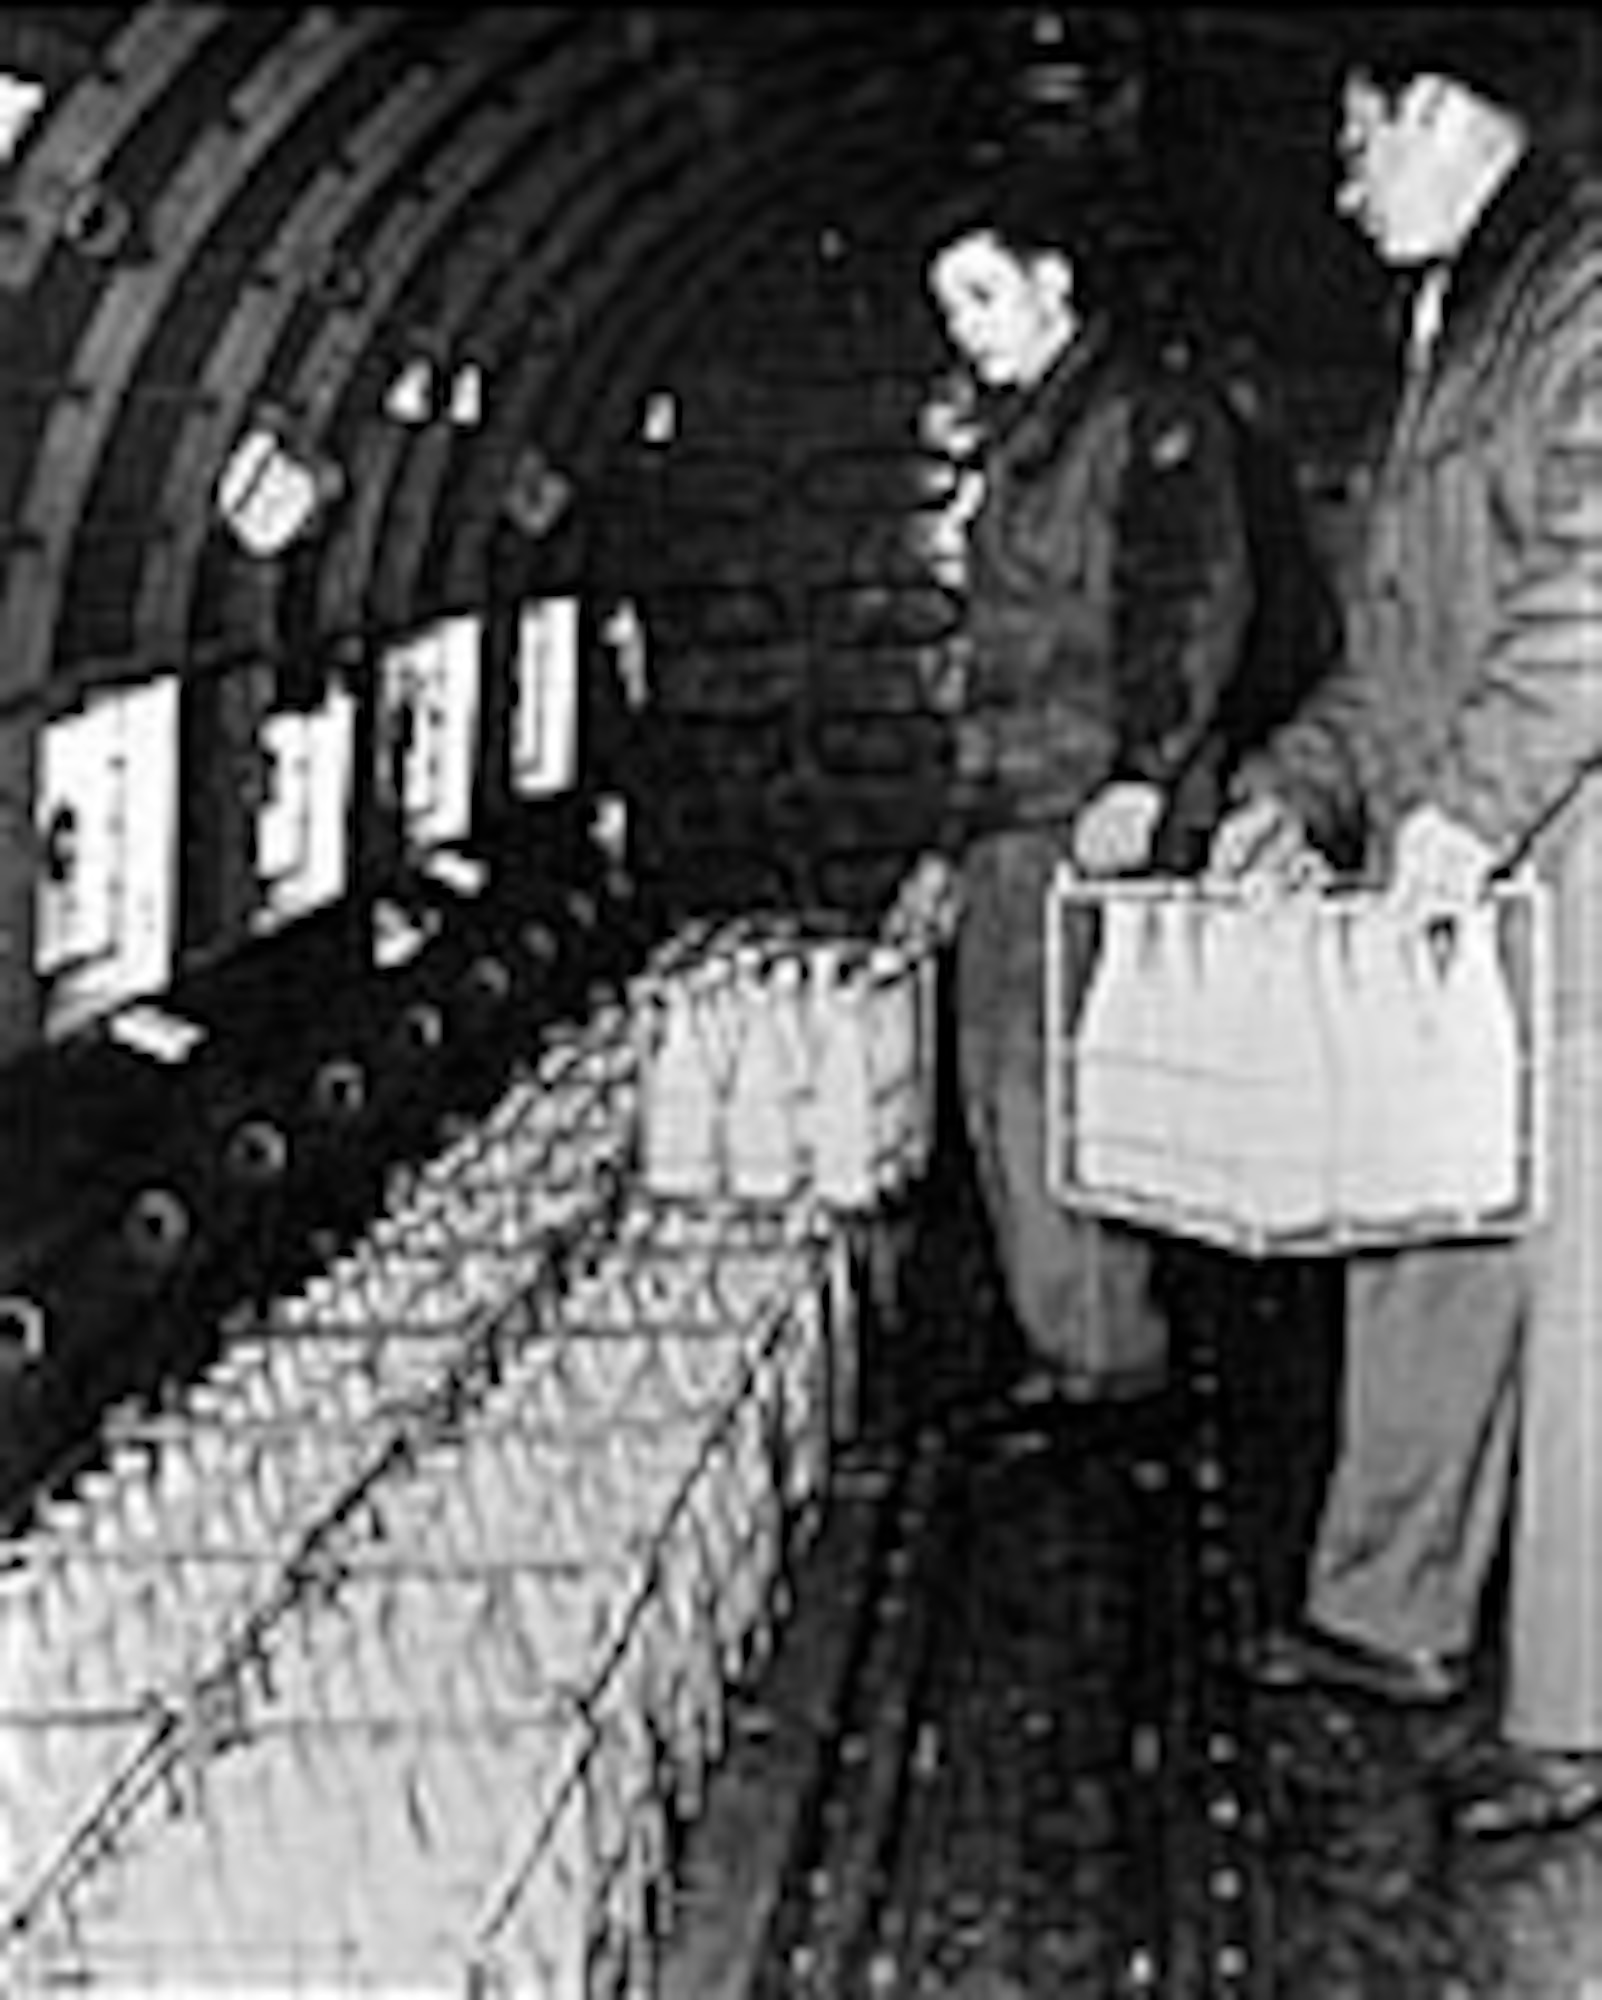 Crates of milk are loaded for the flight to Berlin. (U.S. Air Force photo)